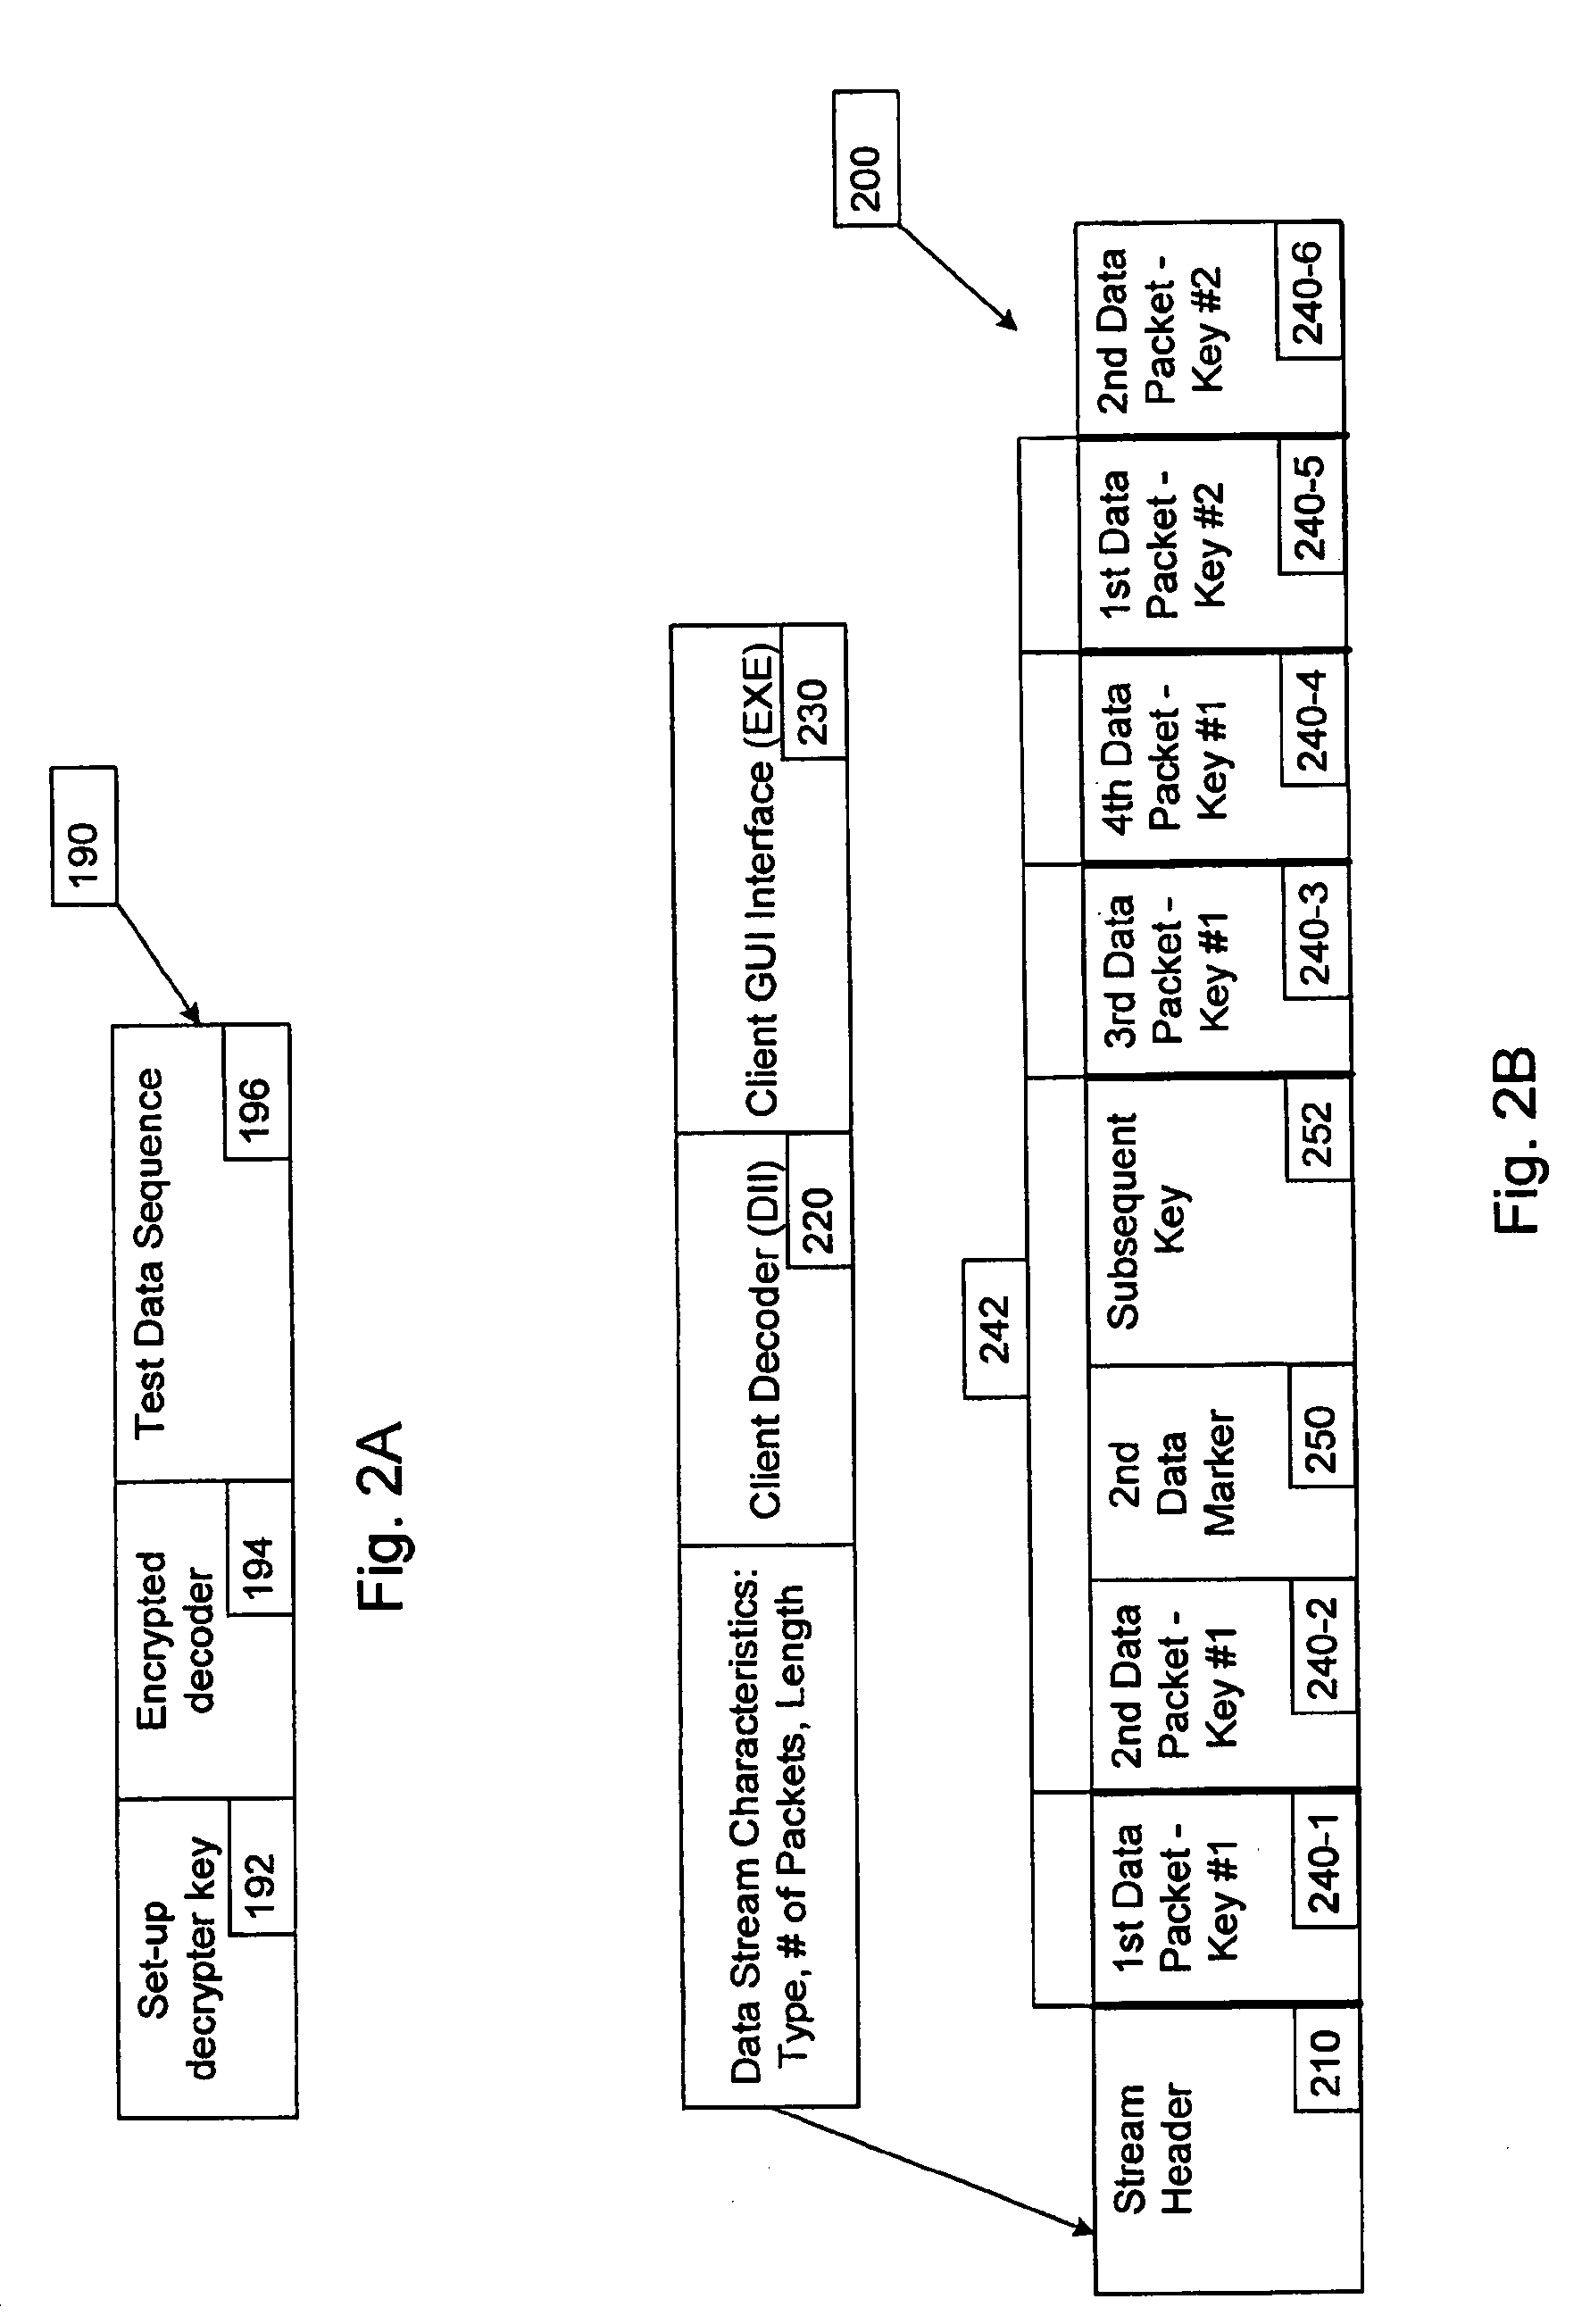 Method and apparatus for streaming data using rotating cryptographic keys